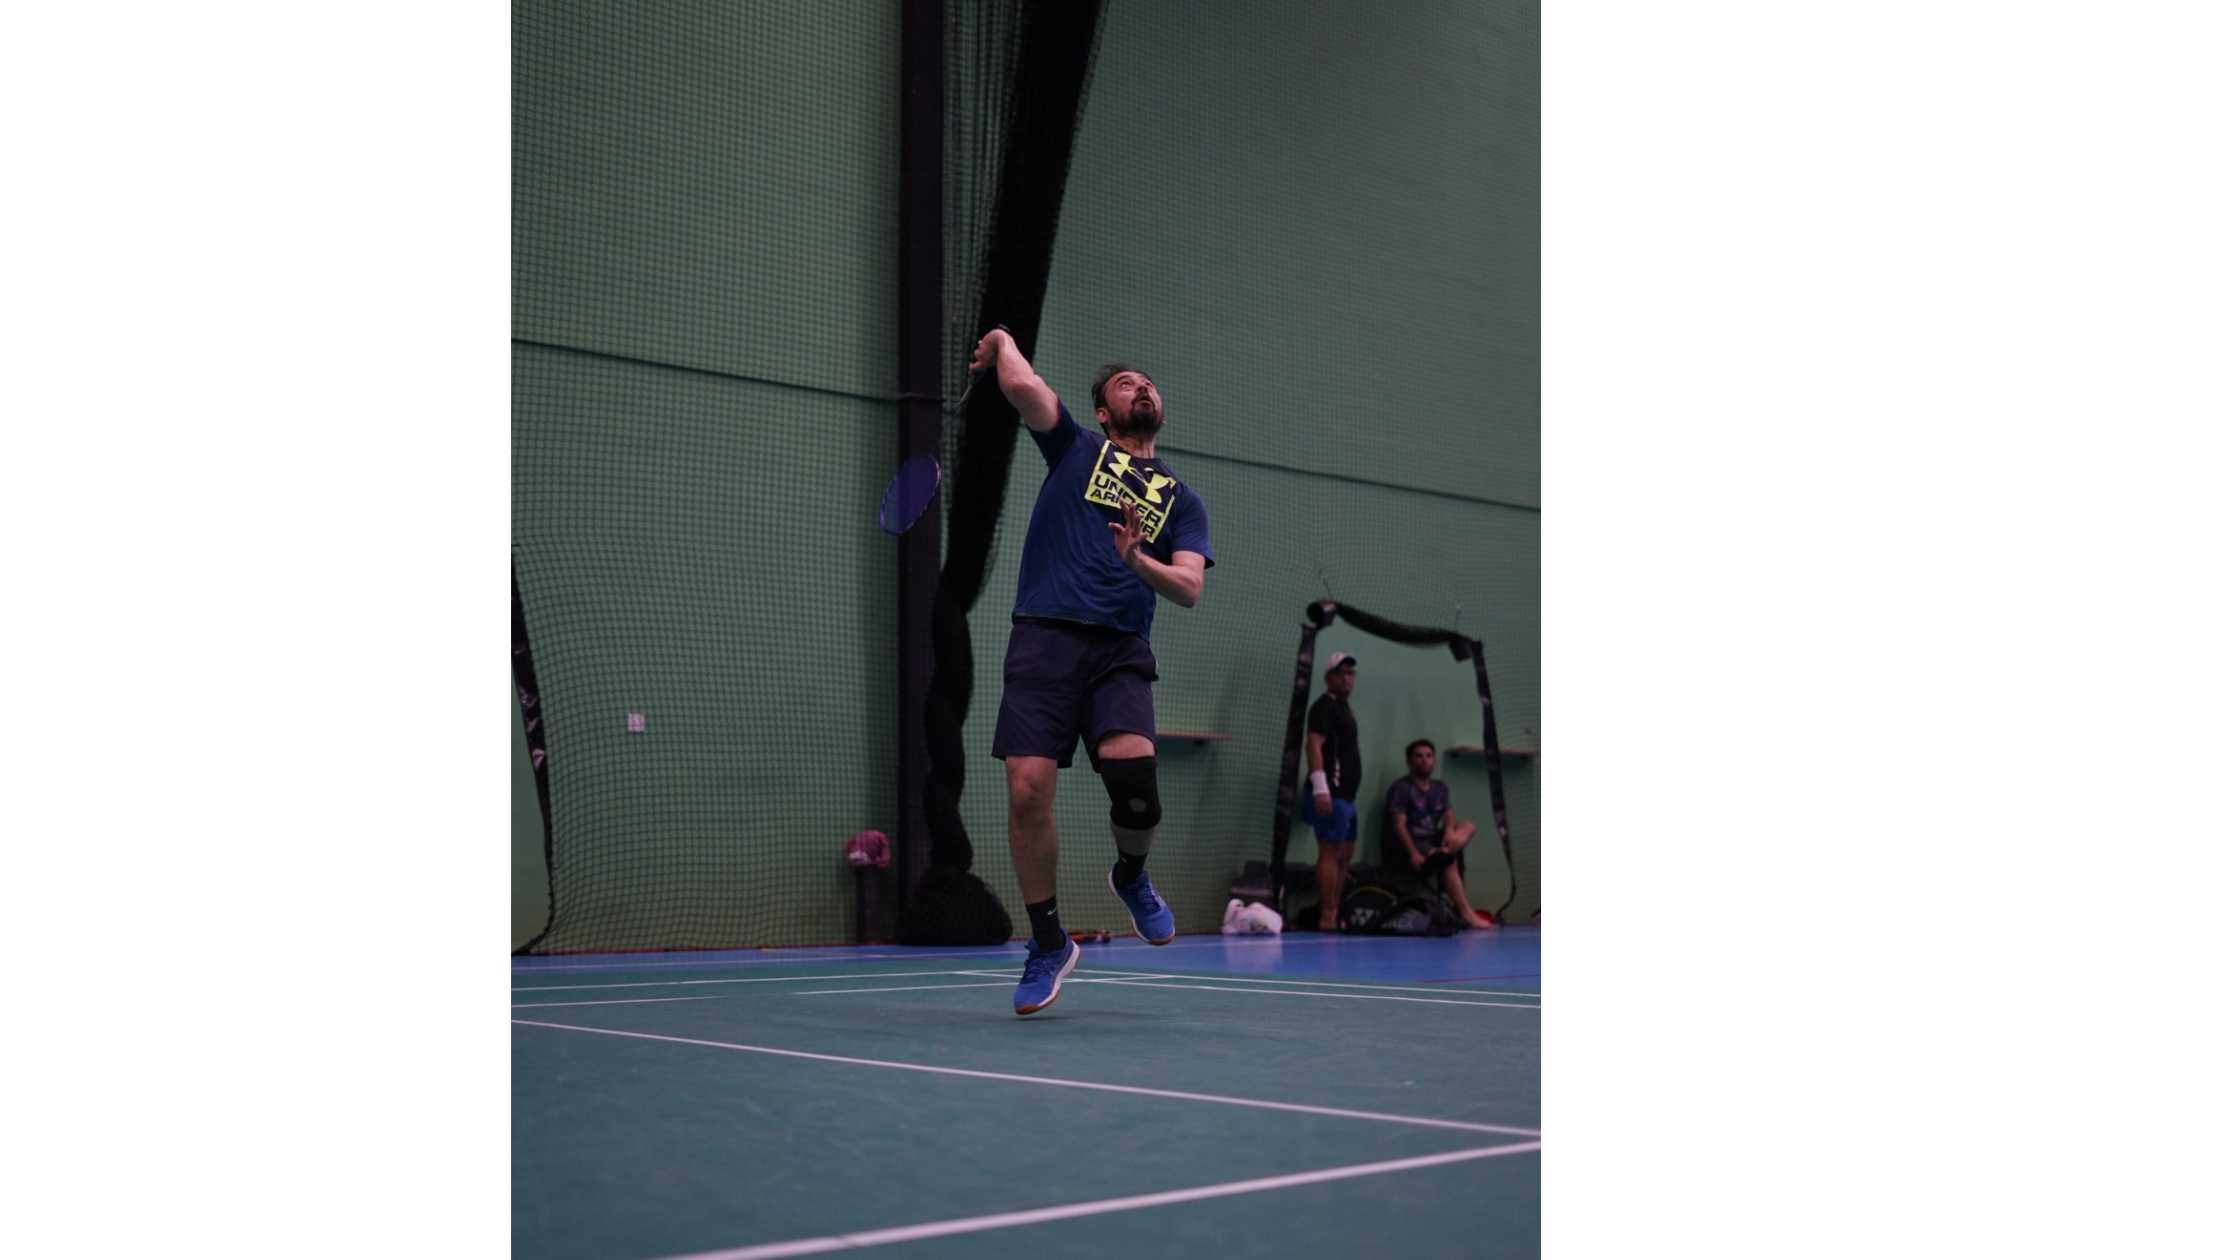 Want to Improve Your Badminton Game? Discover How with Our Premier Coaching in Dubai1. The Importance of Professional Badminton Coaching in Dubai